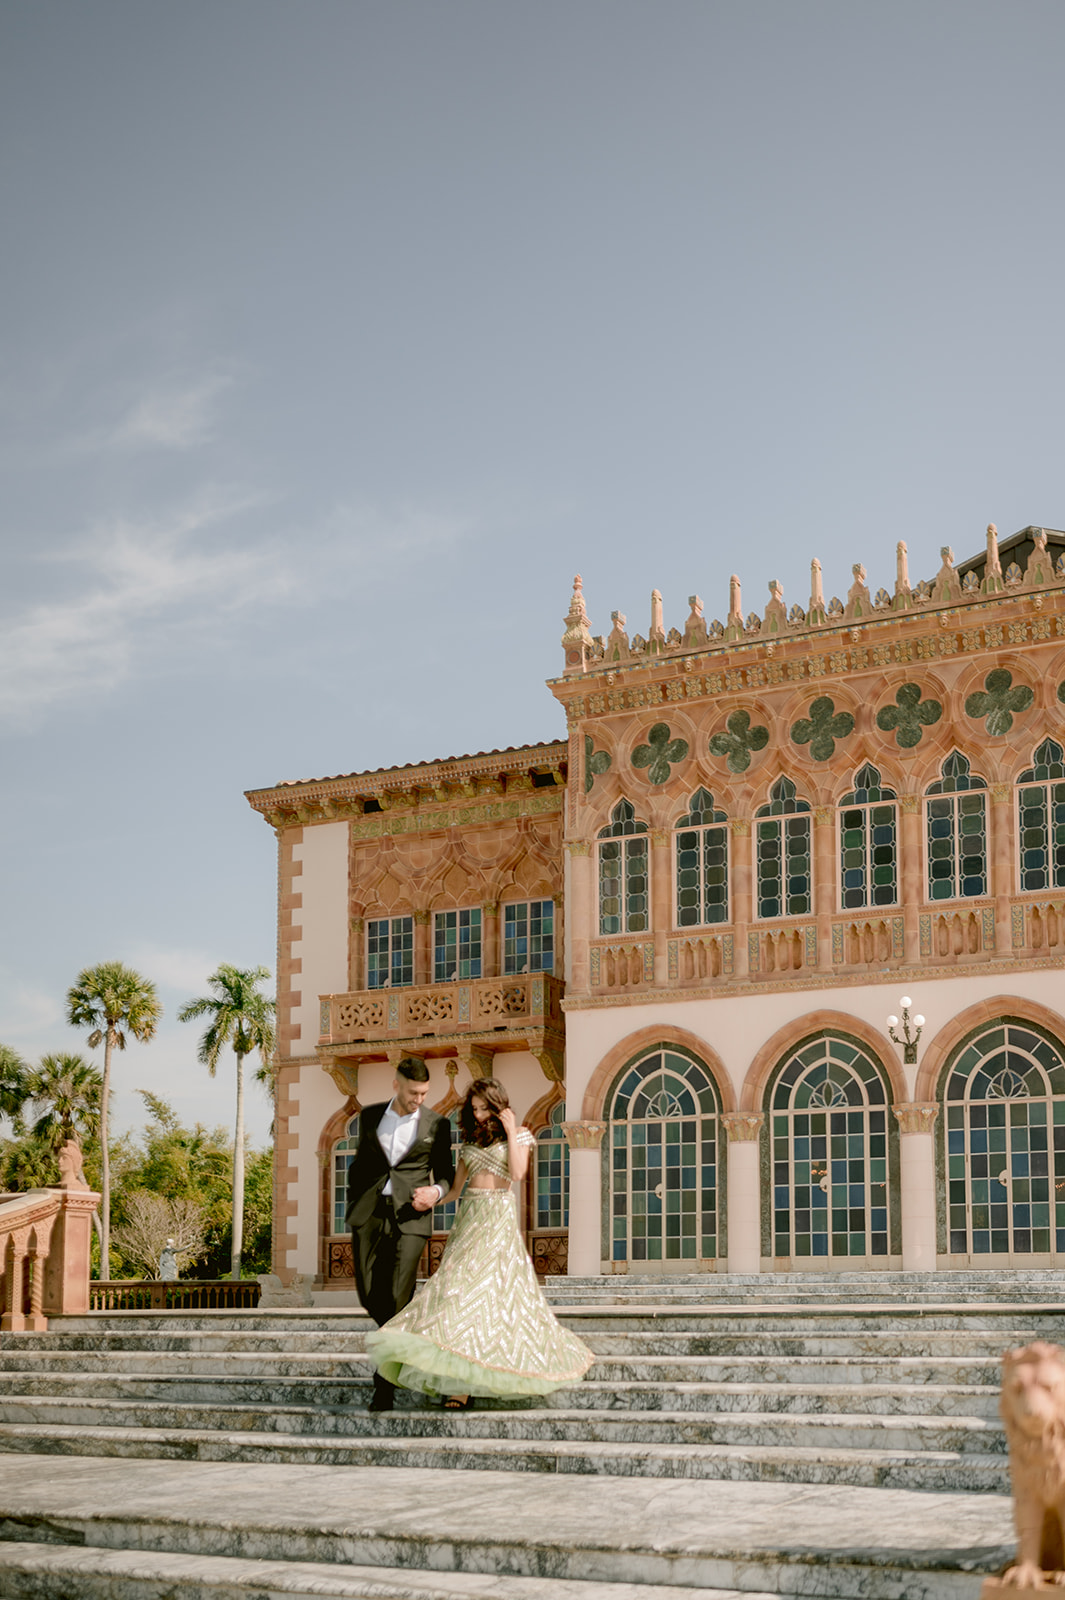 "Indian couple in traditional attire showcases their love and cultural heritage at the Ringling Museum's Ca' d'Zan mansi